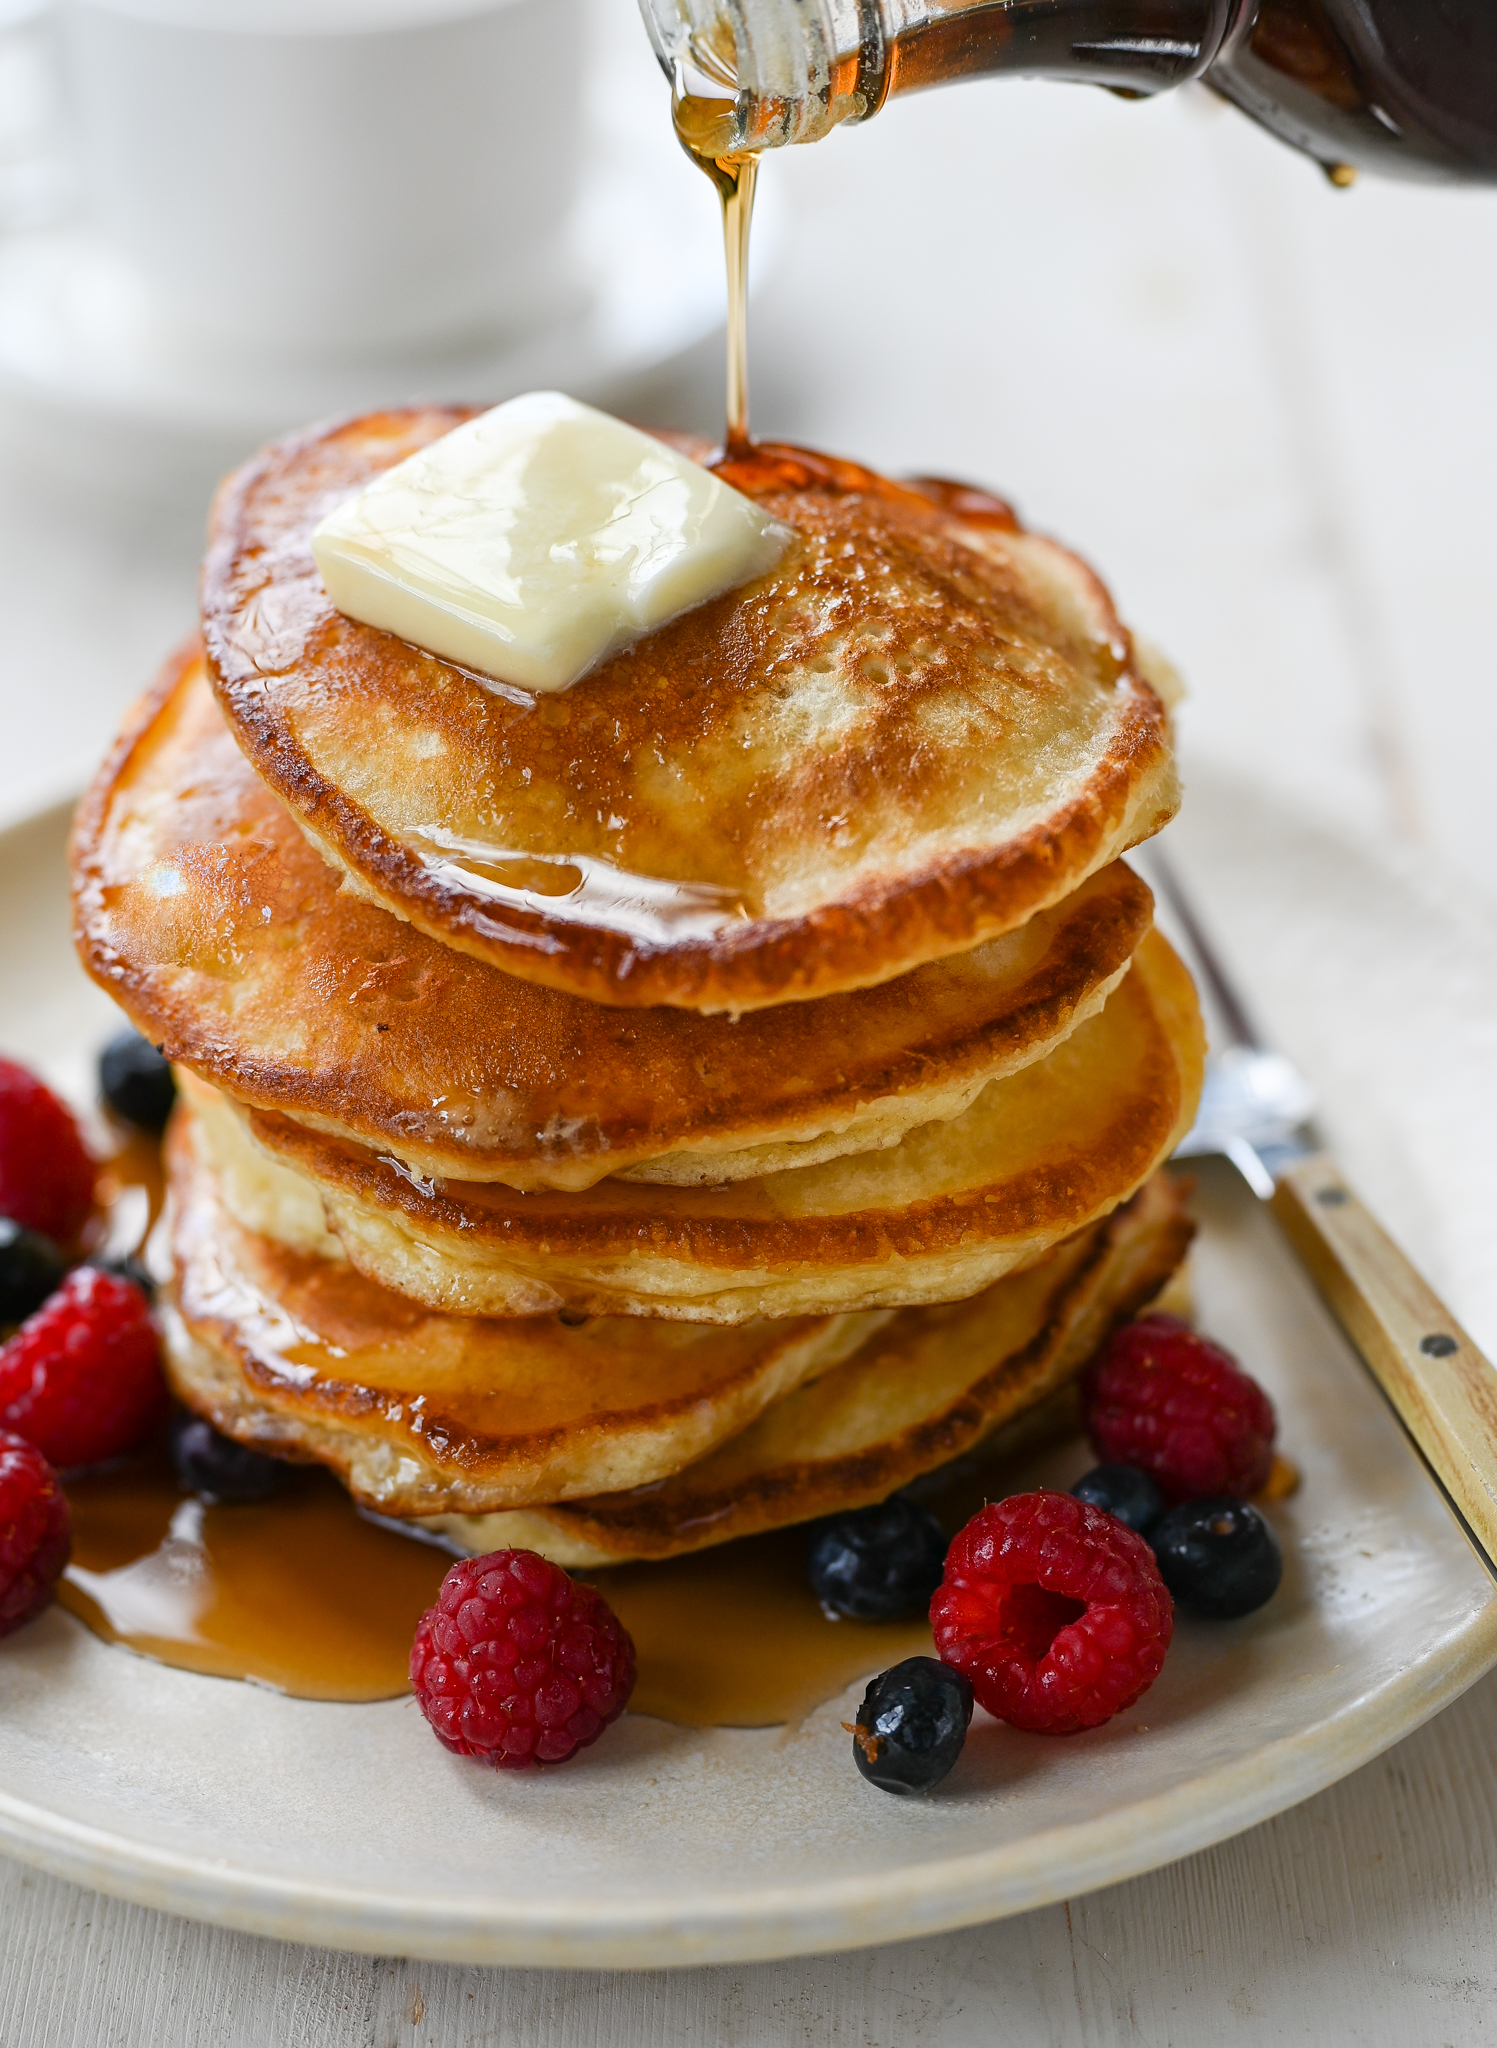 pancakes with butter and syrup